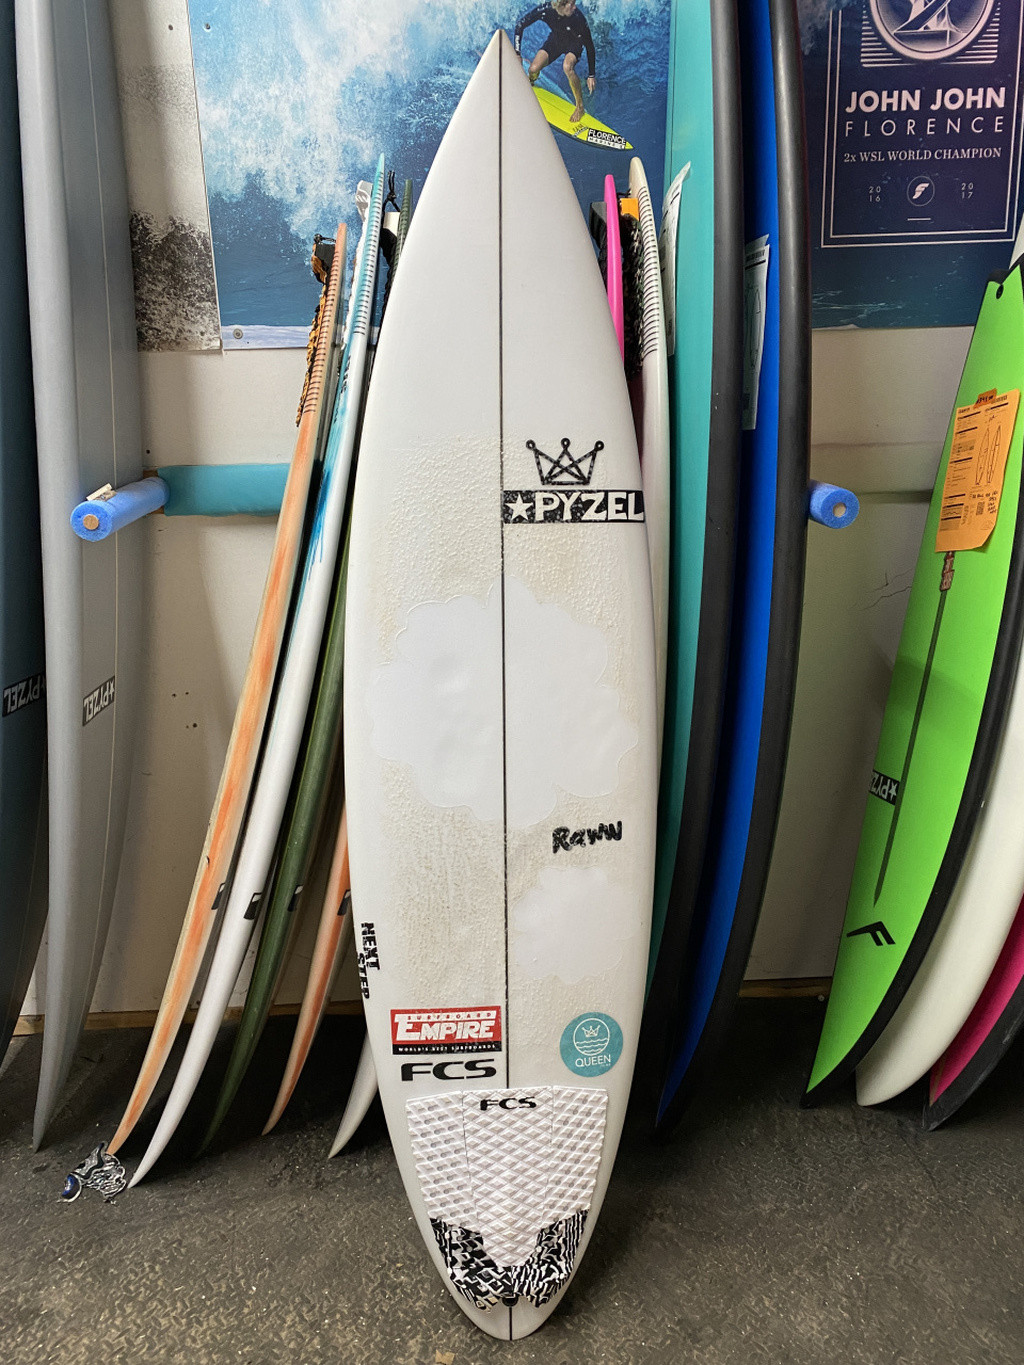 Pyzel Surfboards - Next Step